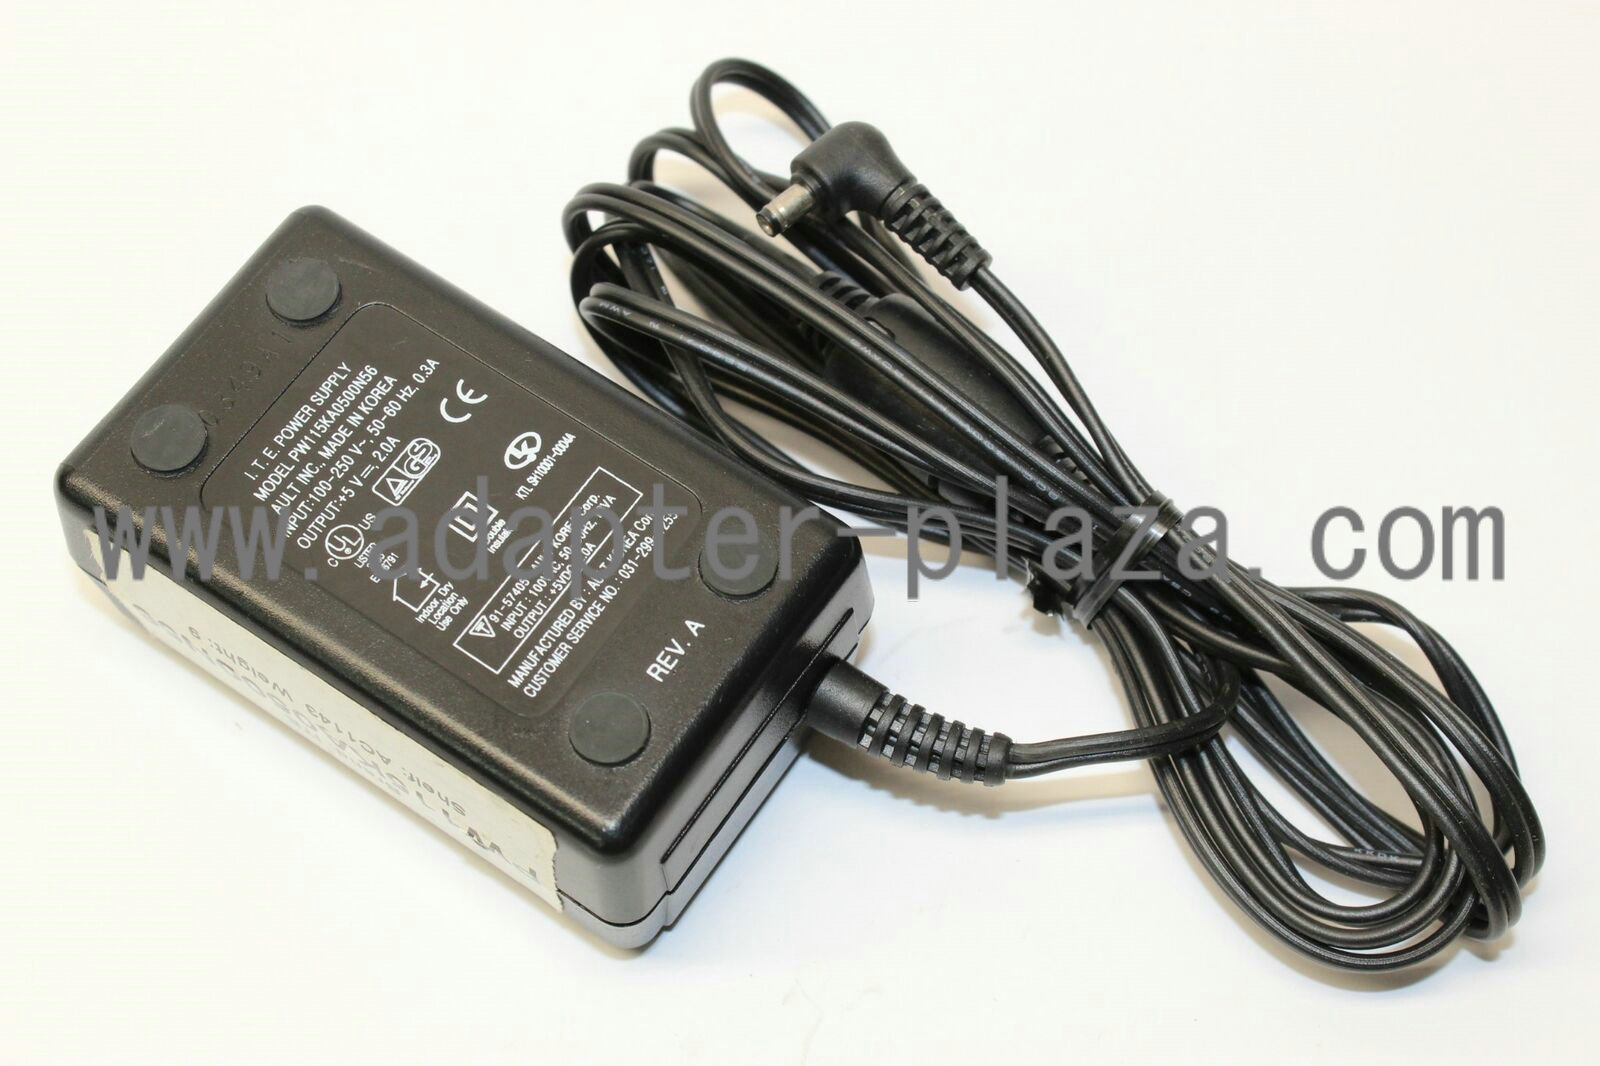 New Ault PW115KA0500N56 ITE Power Supply 5V 2A AC Adapter Transformer Charger